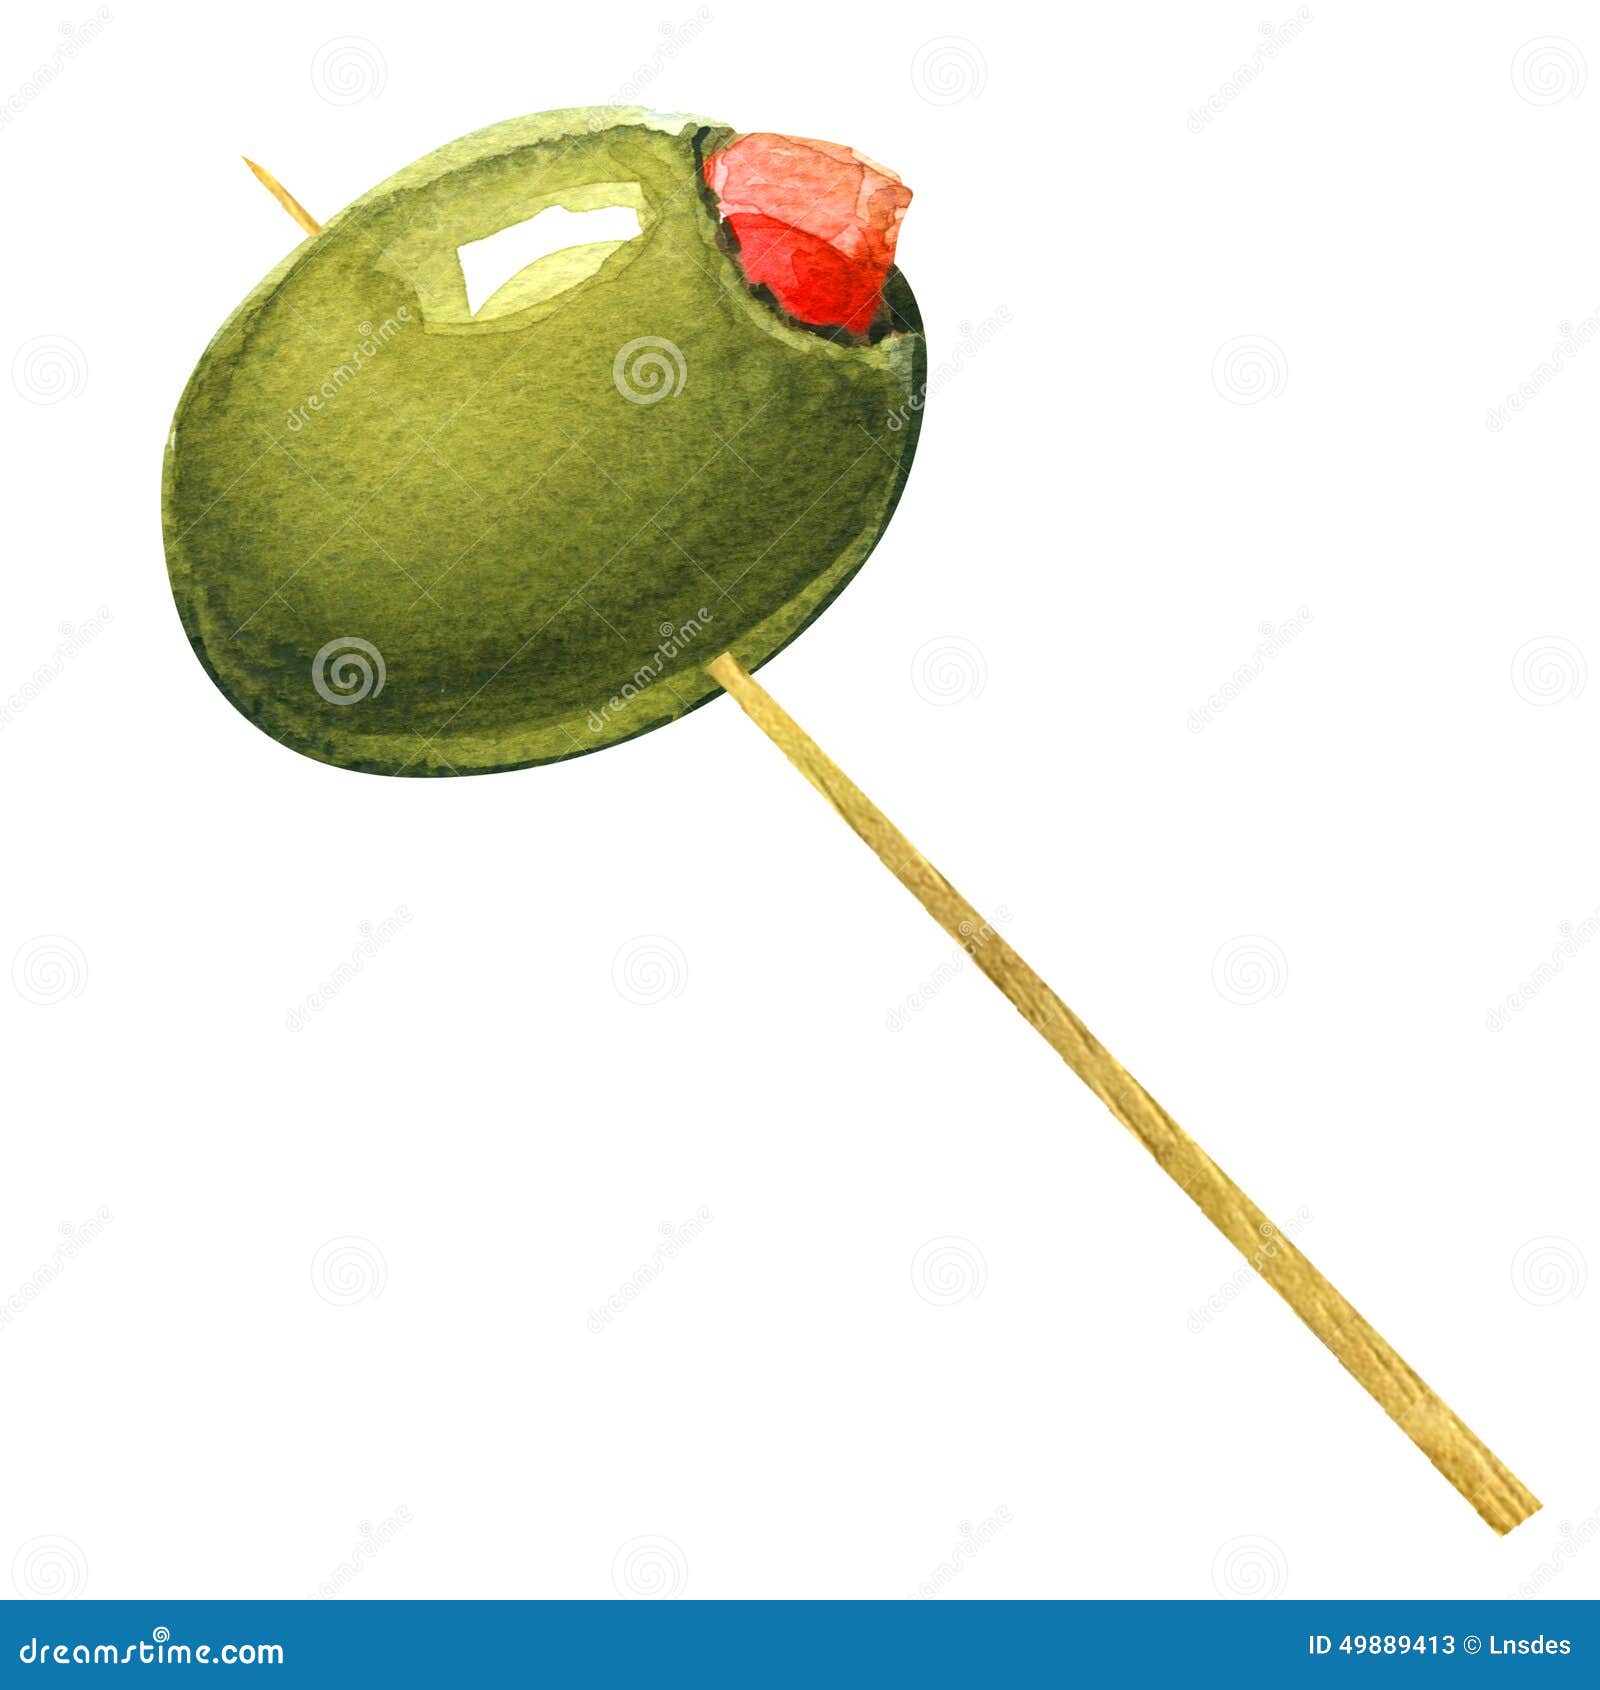 https://thumbs.dreamstime.com/z/green-olives-stuffed-pepper-toothpick-wooden-watercolor-painting-white-background-49889413.jpg